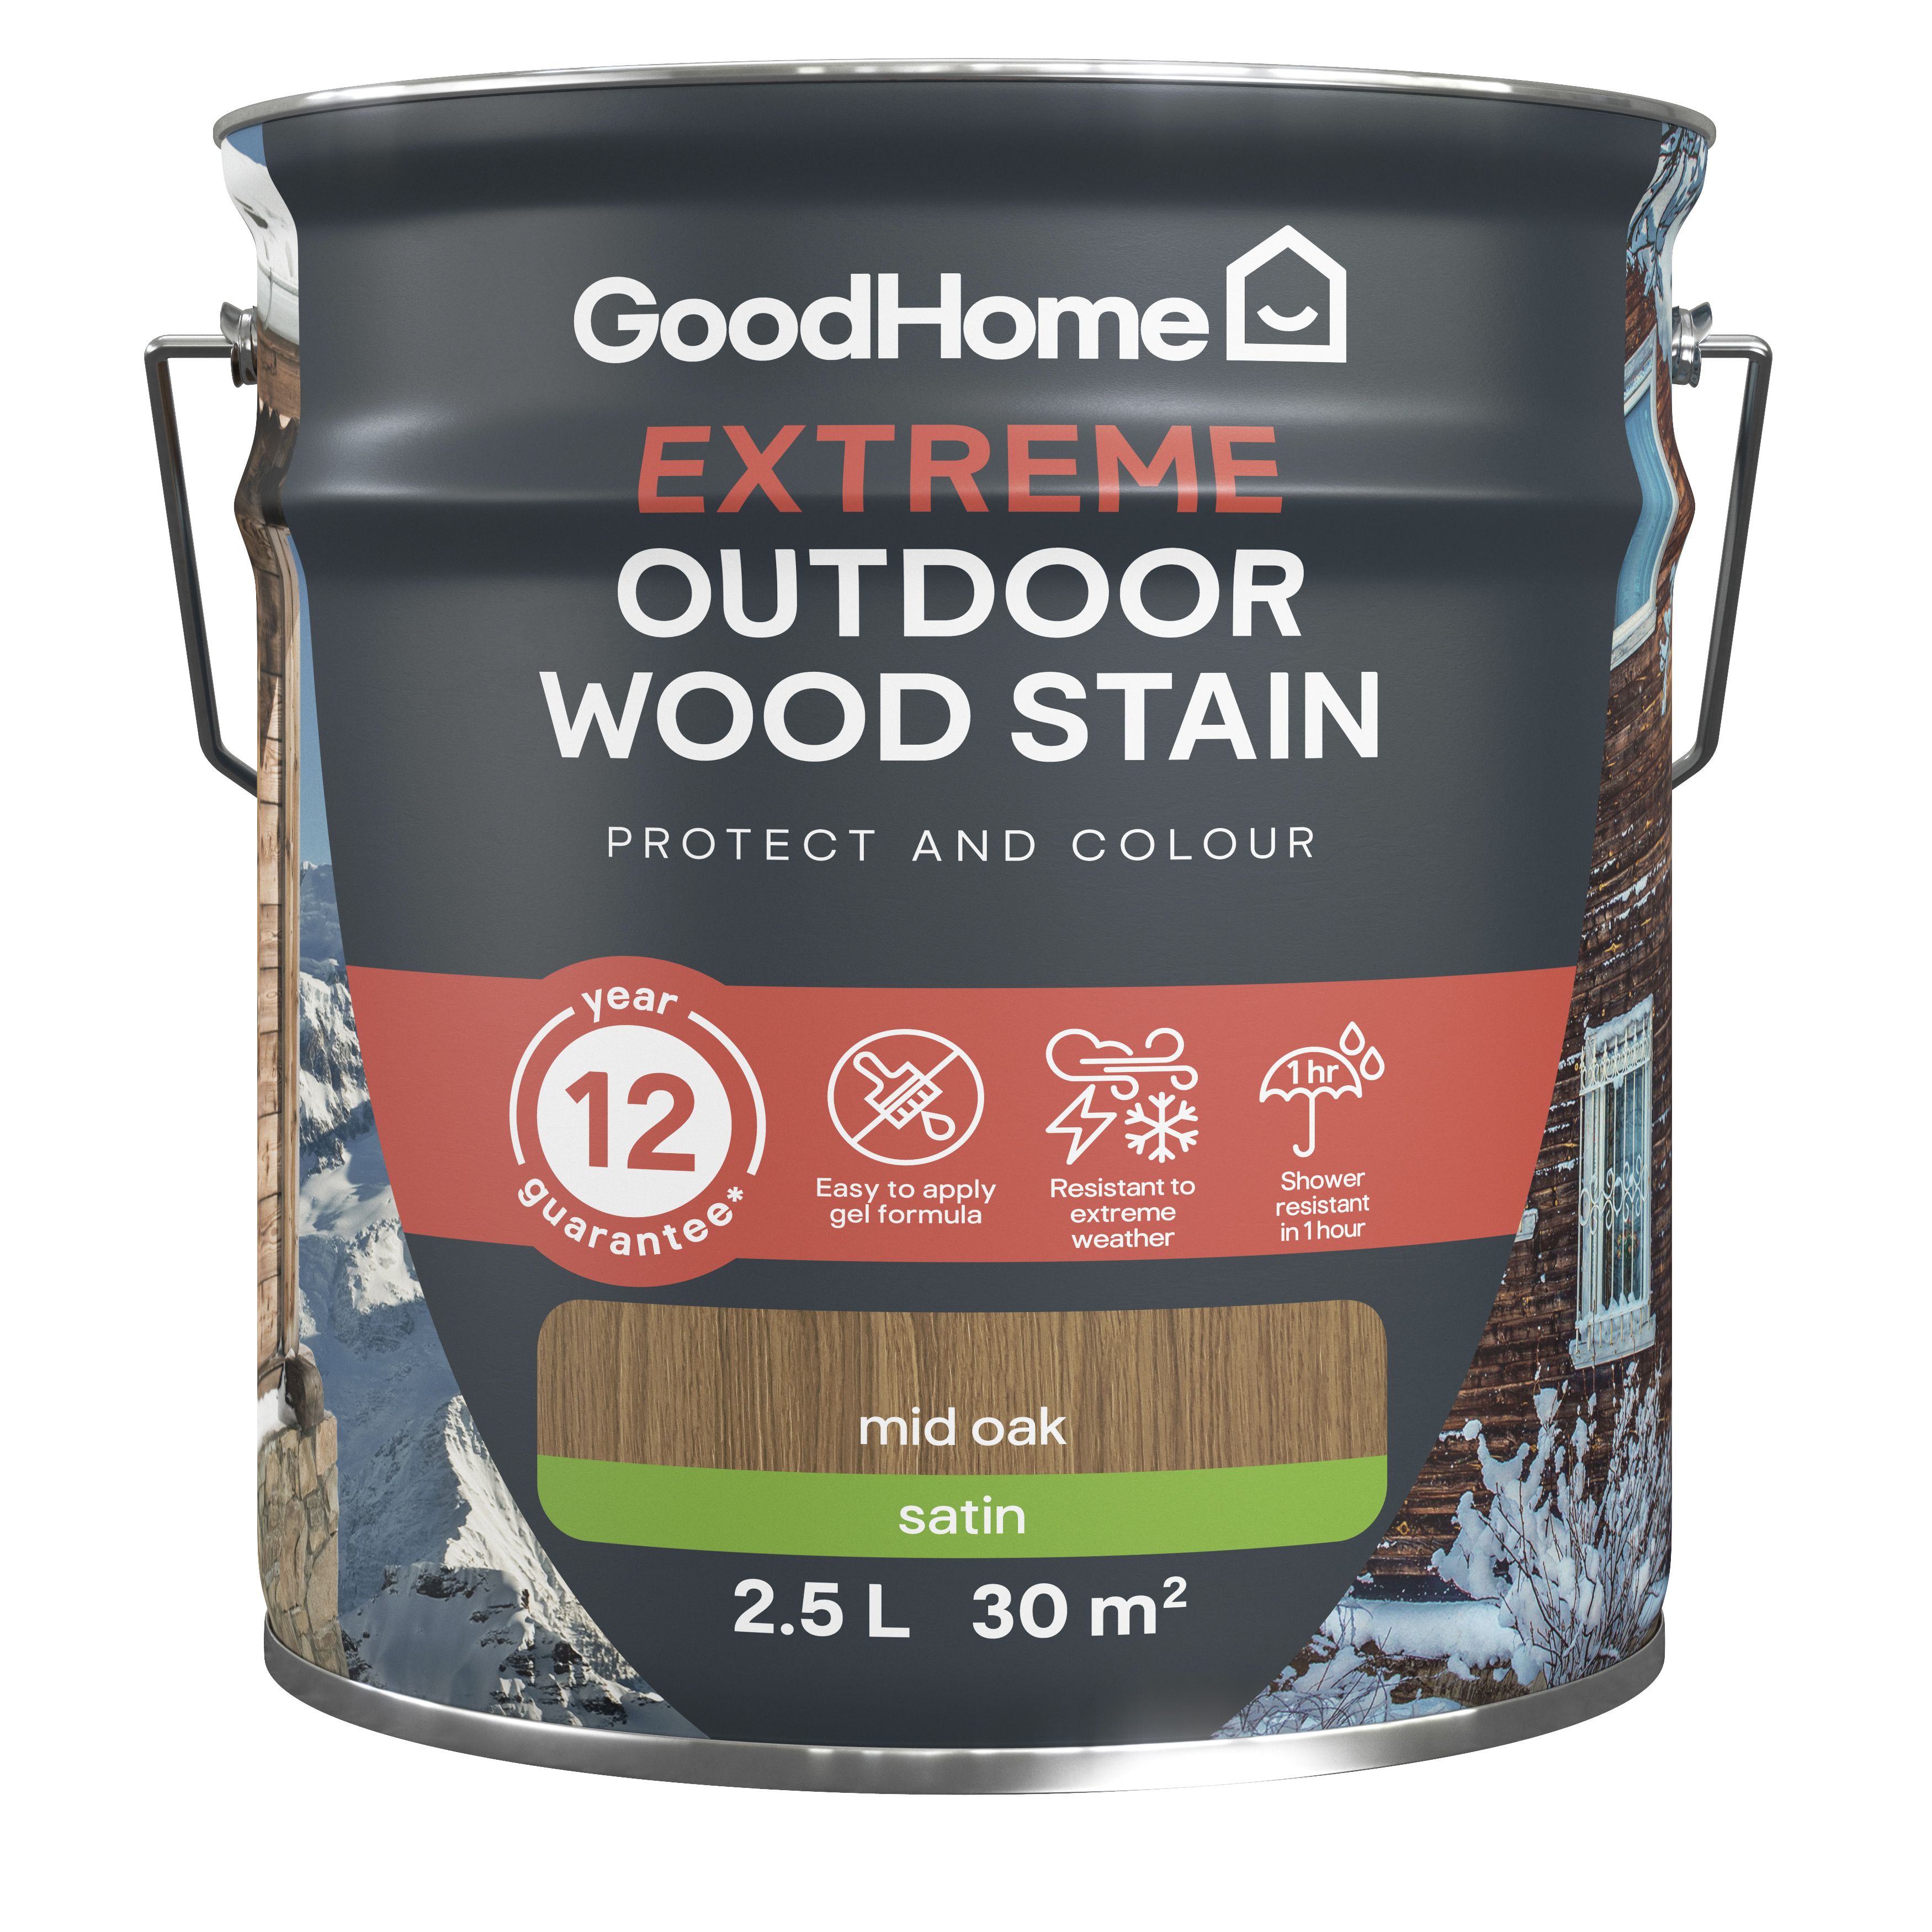 GoodHome Extreme Outdoor Mid Oak Satin Quick dry Wood stain, 2.5L